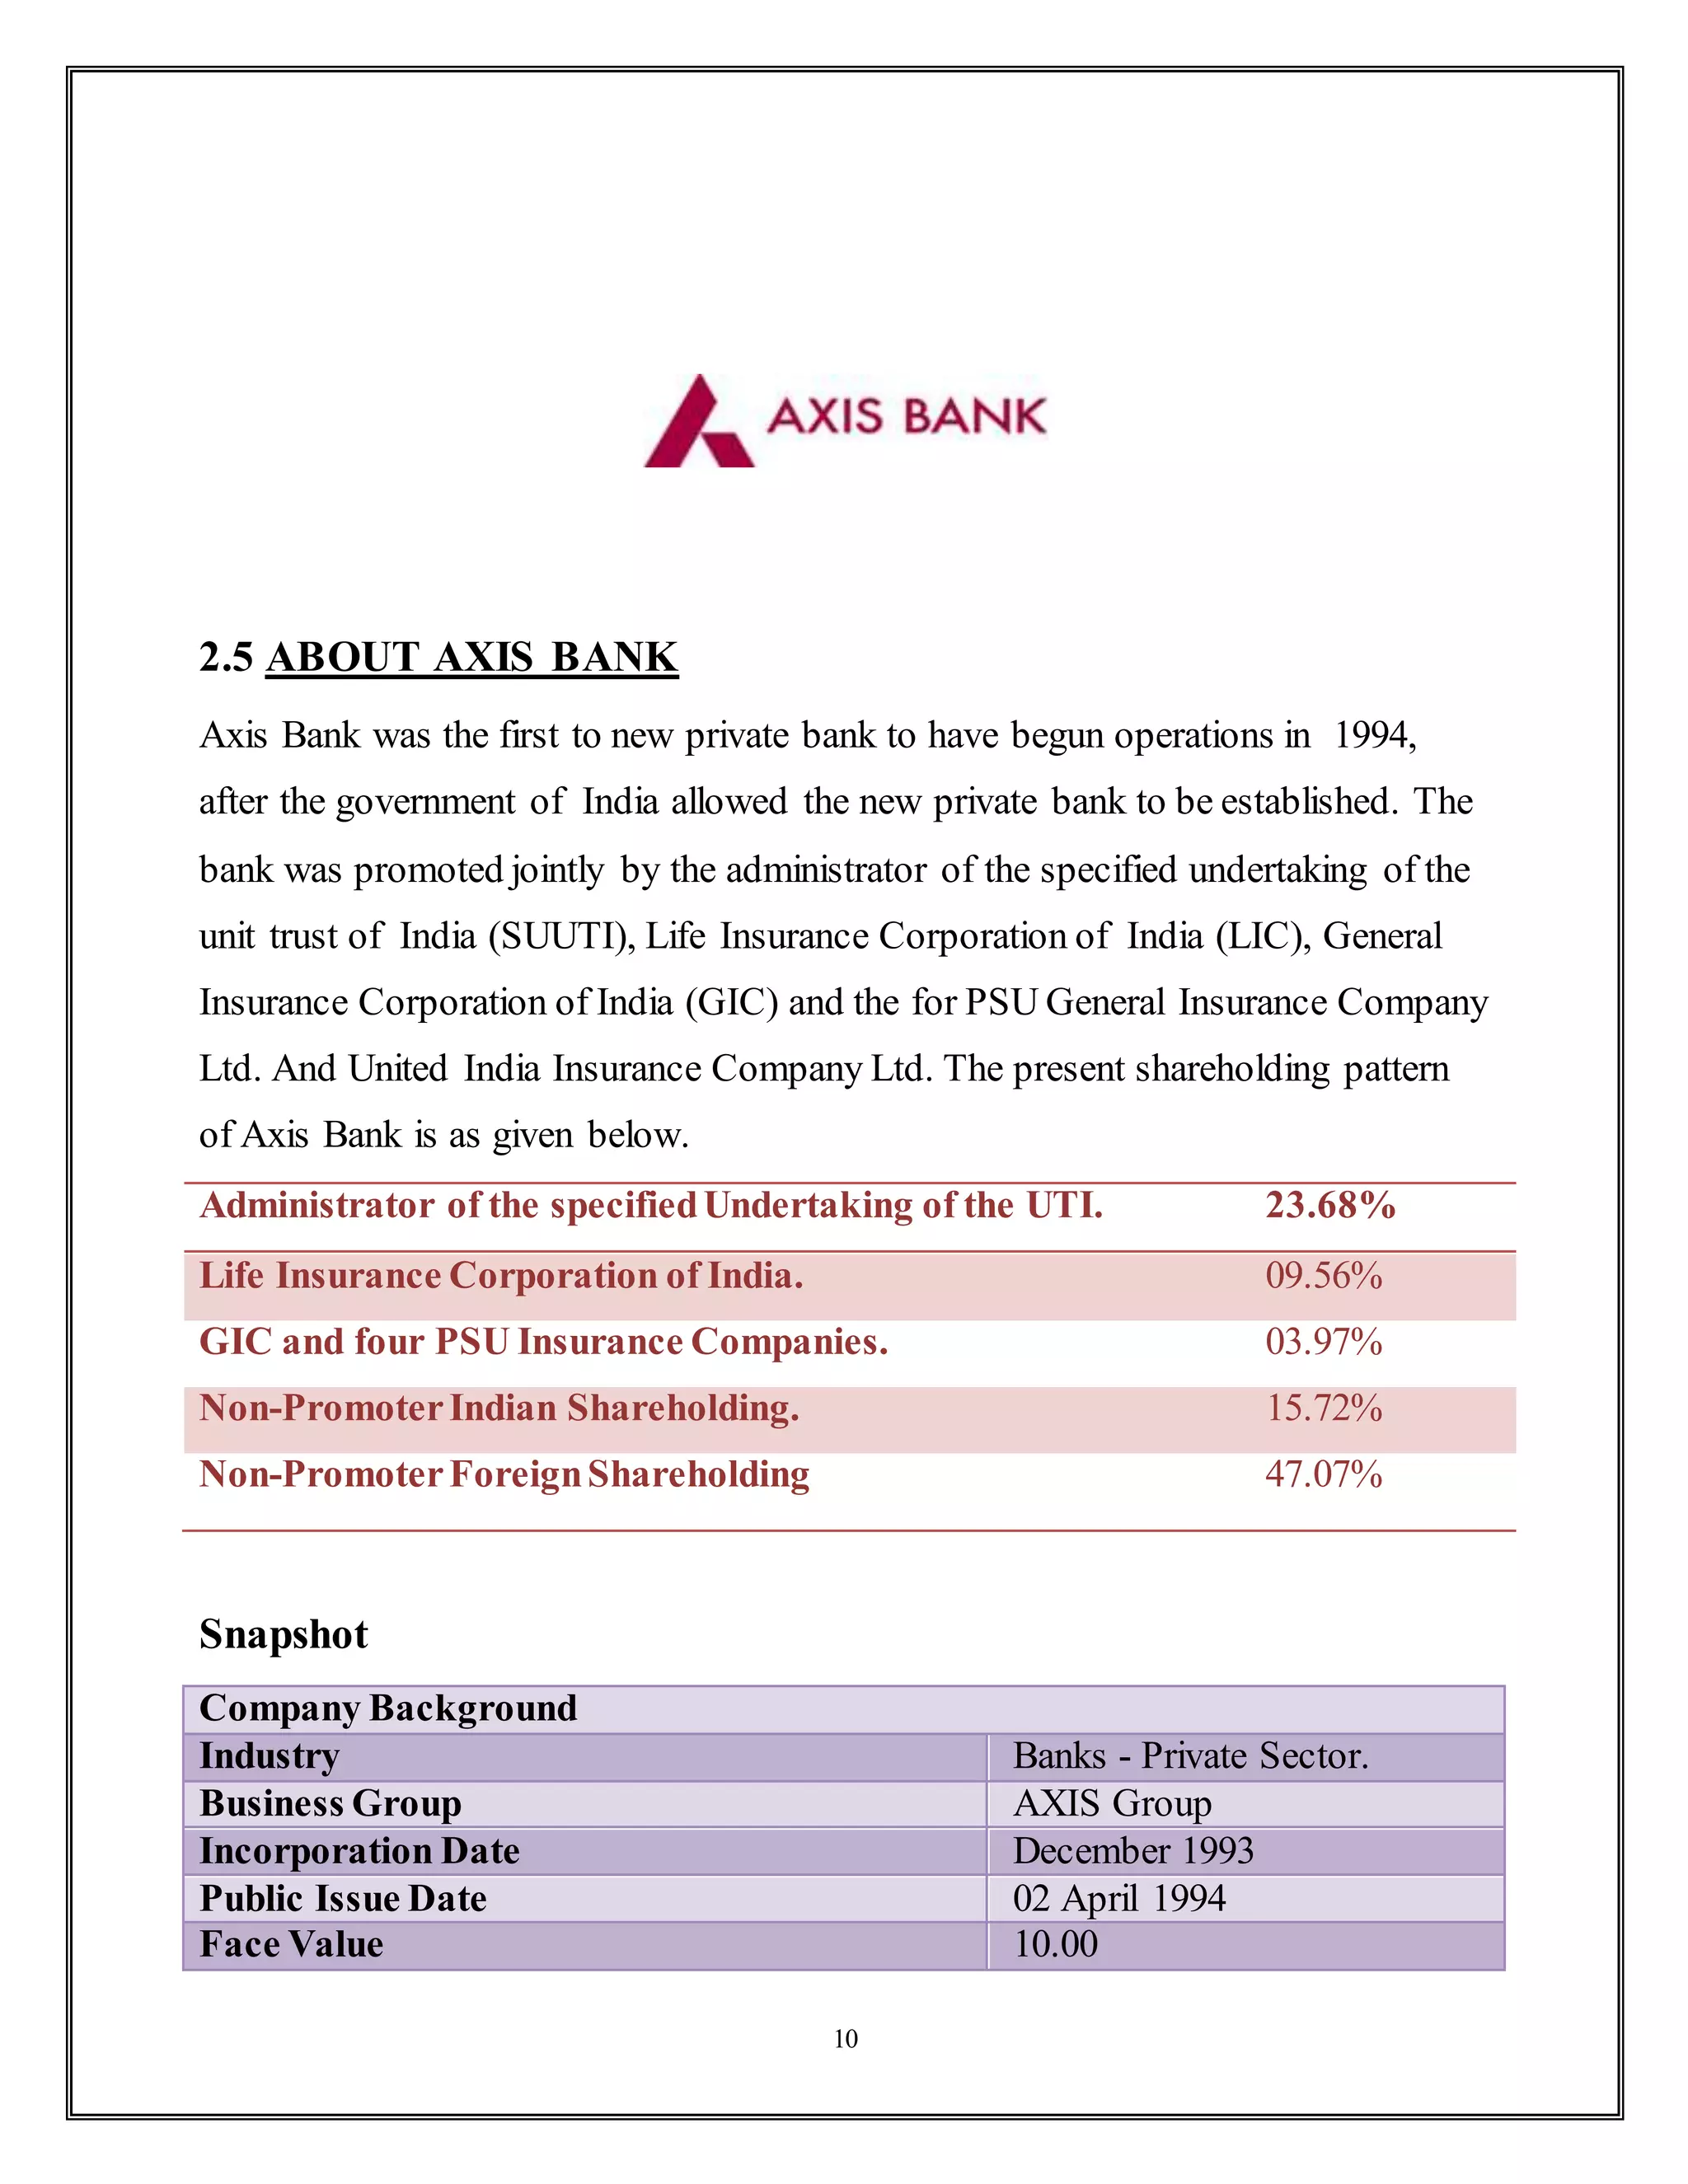 Financial Analysis of Axis Bank Services (MBA Finance)